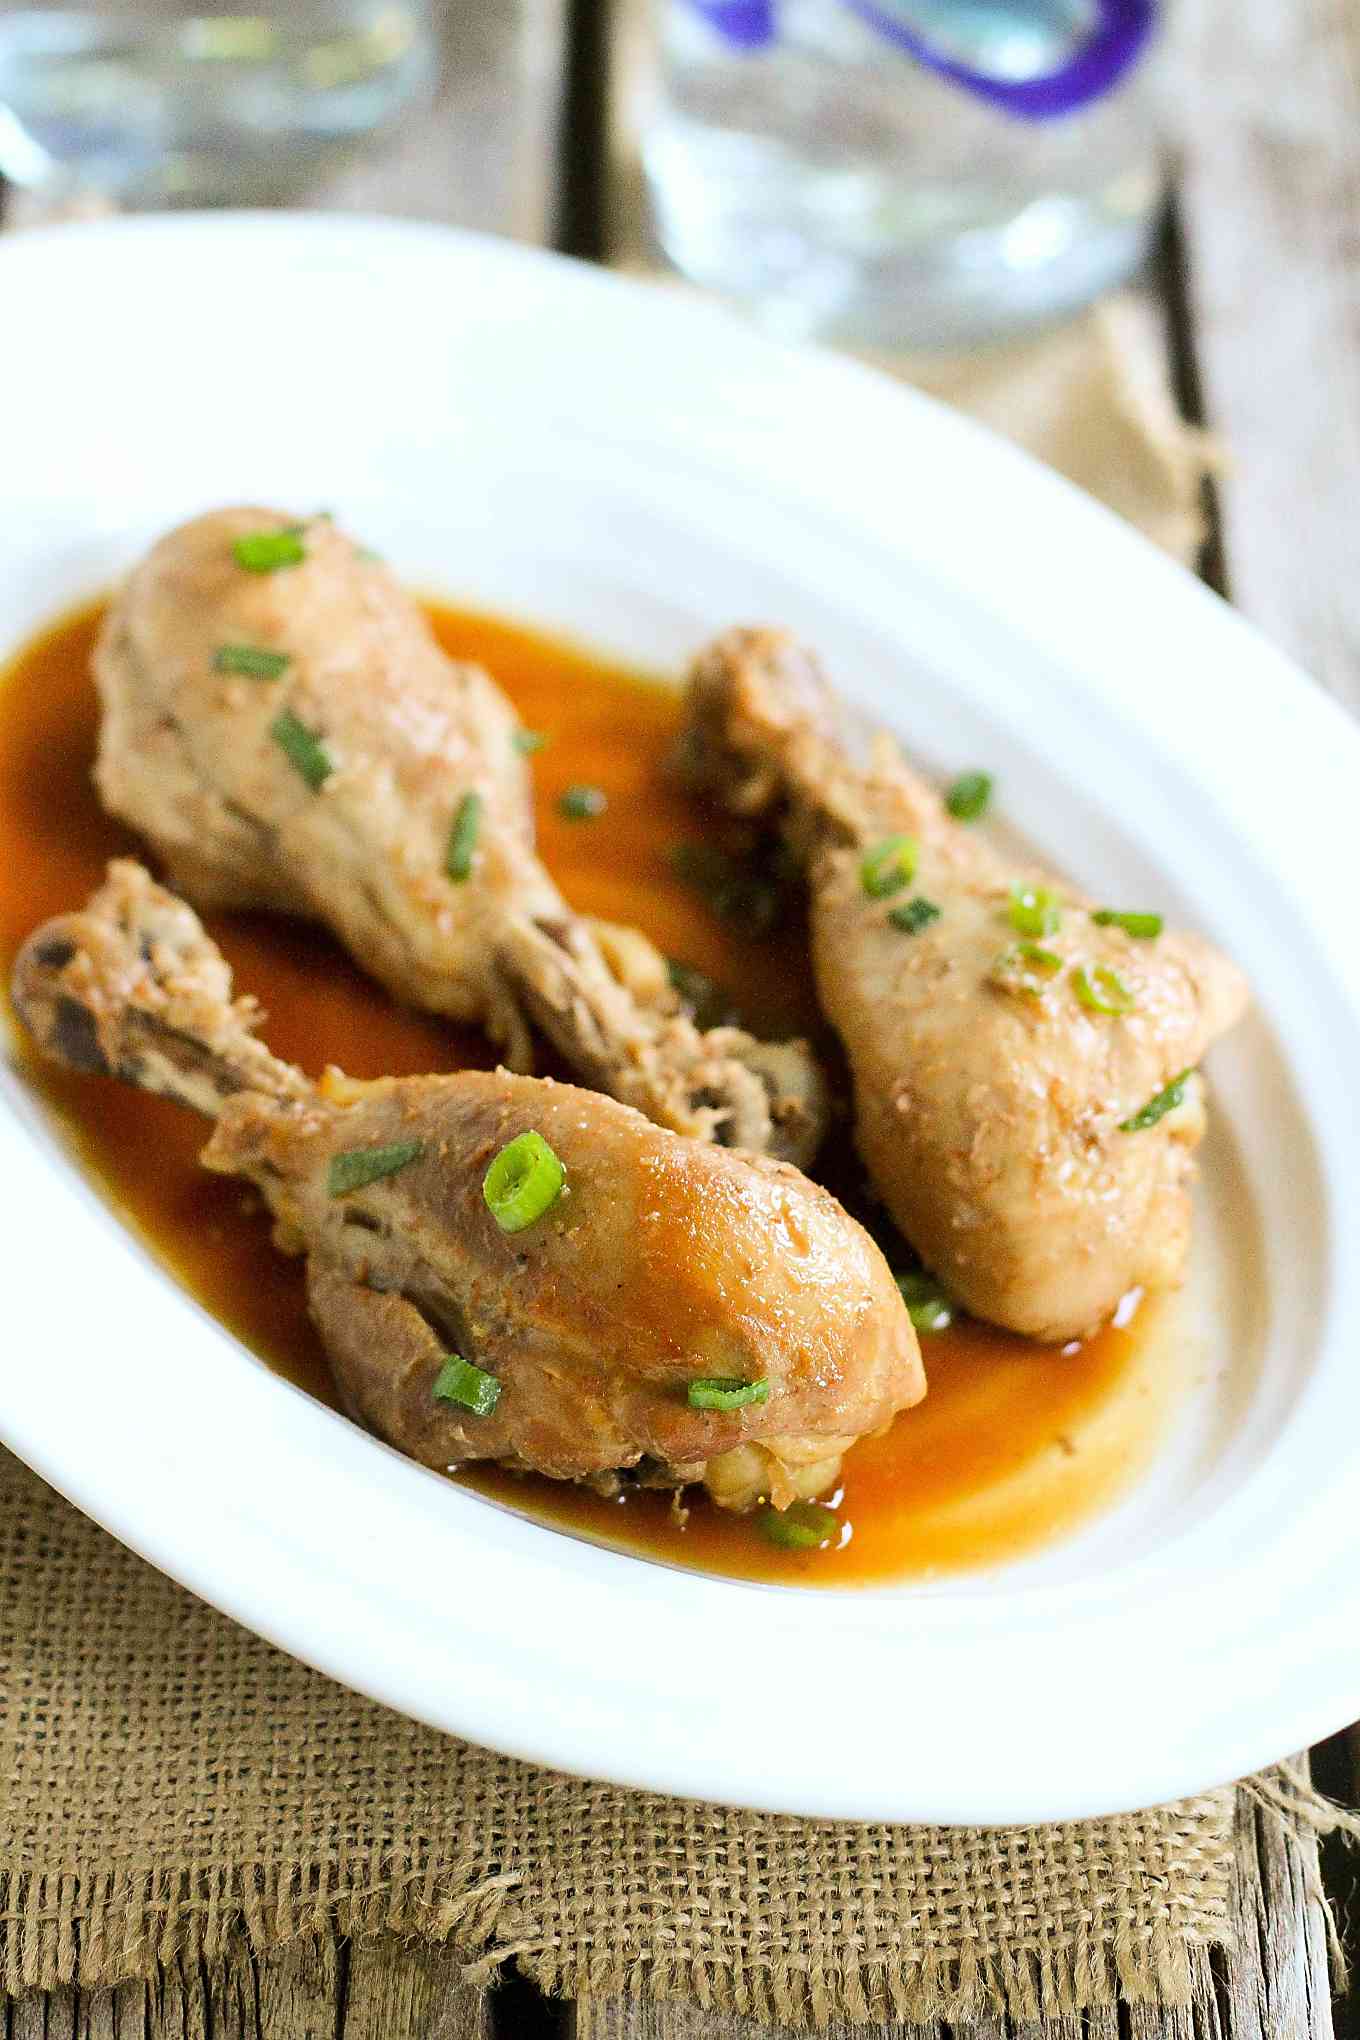 The Best Slow Cooker and Instant Pot Chicken Drumsticks featured on Slow Cooker or Pressure Cooker at SlowCookerFromScratch.com